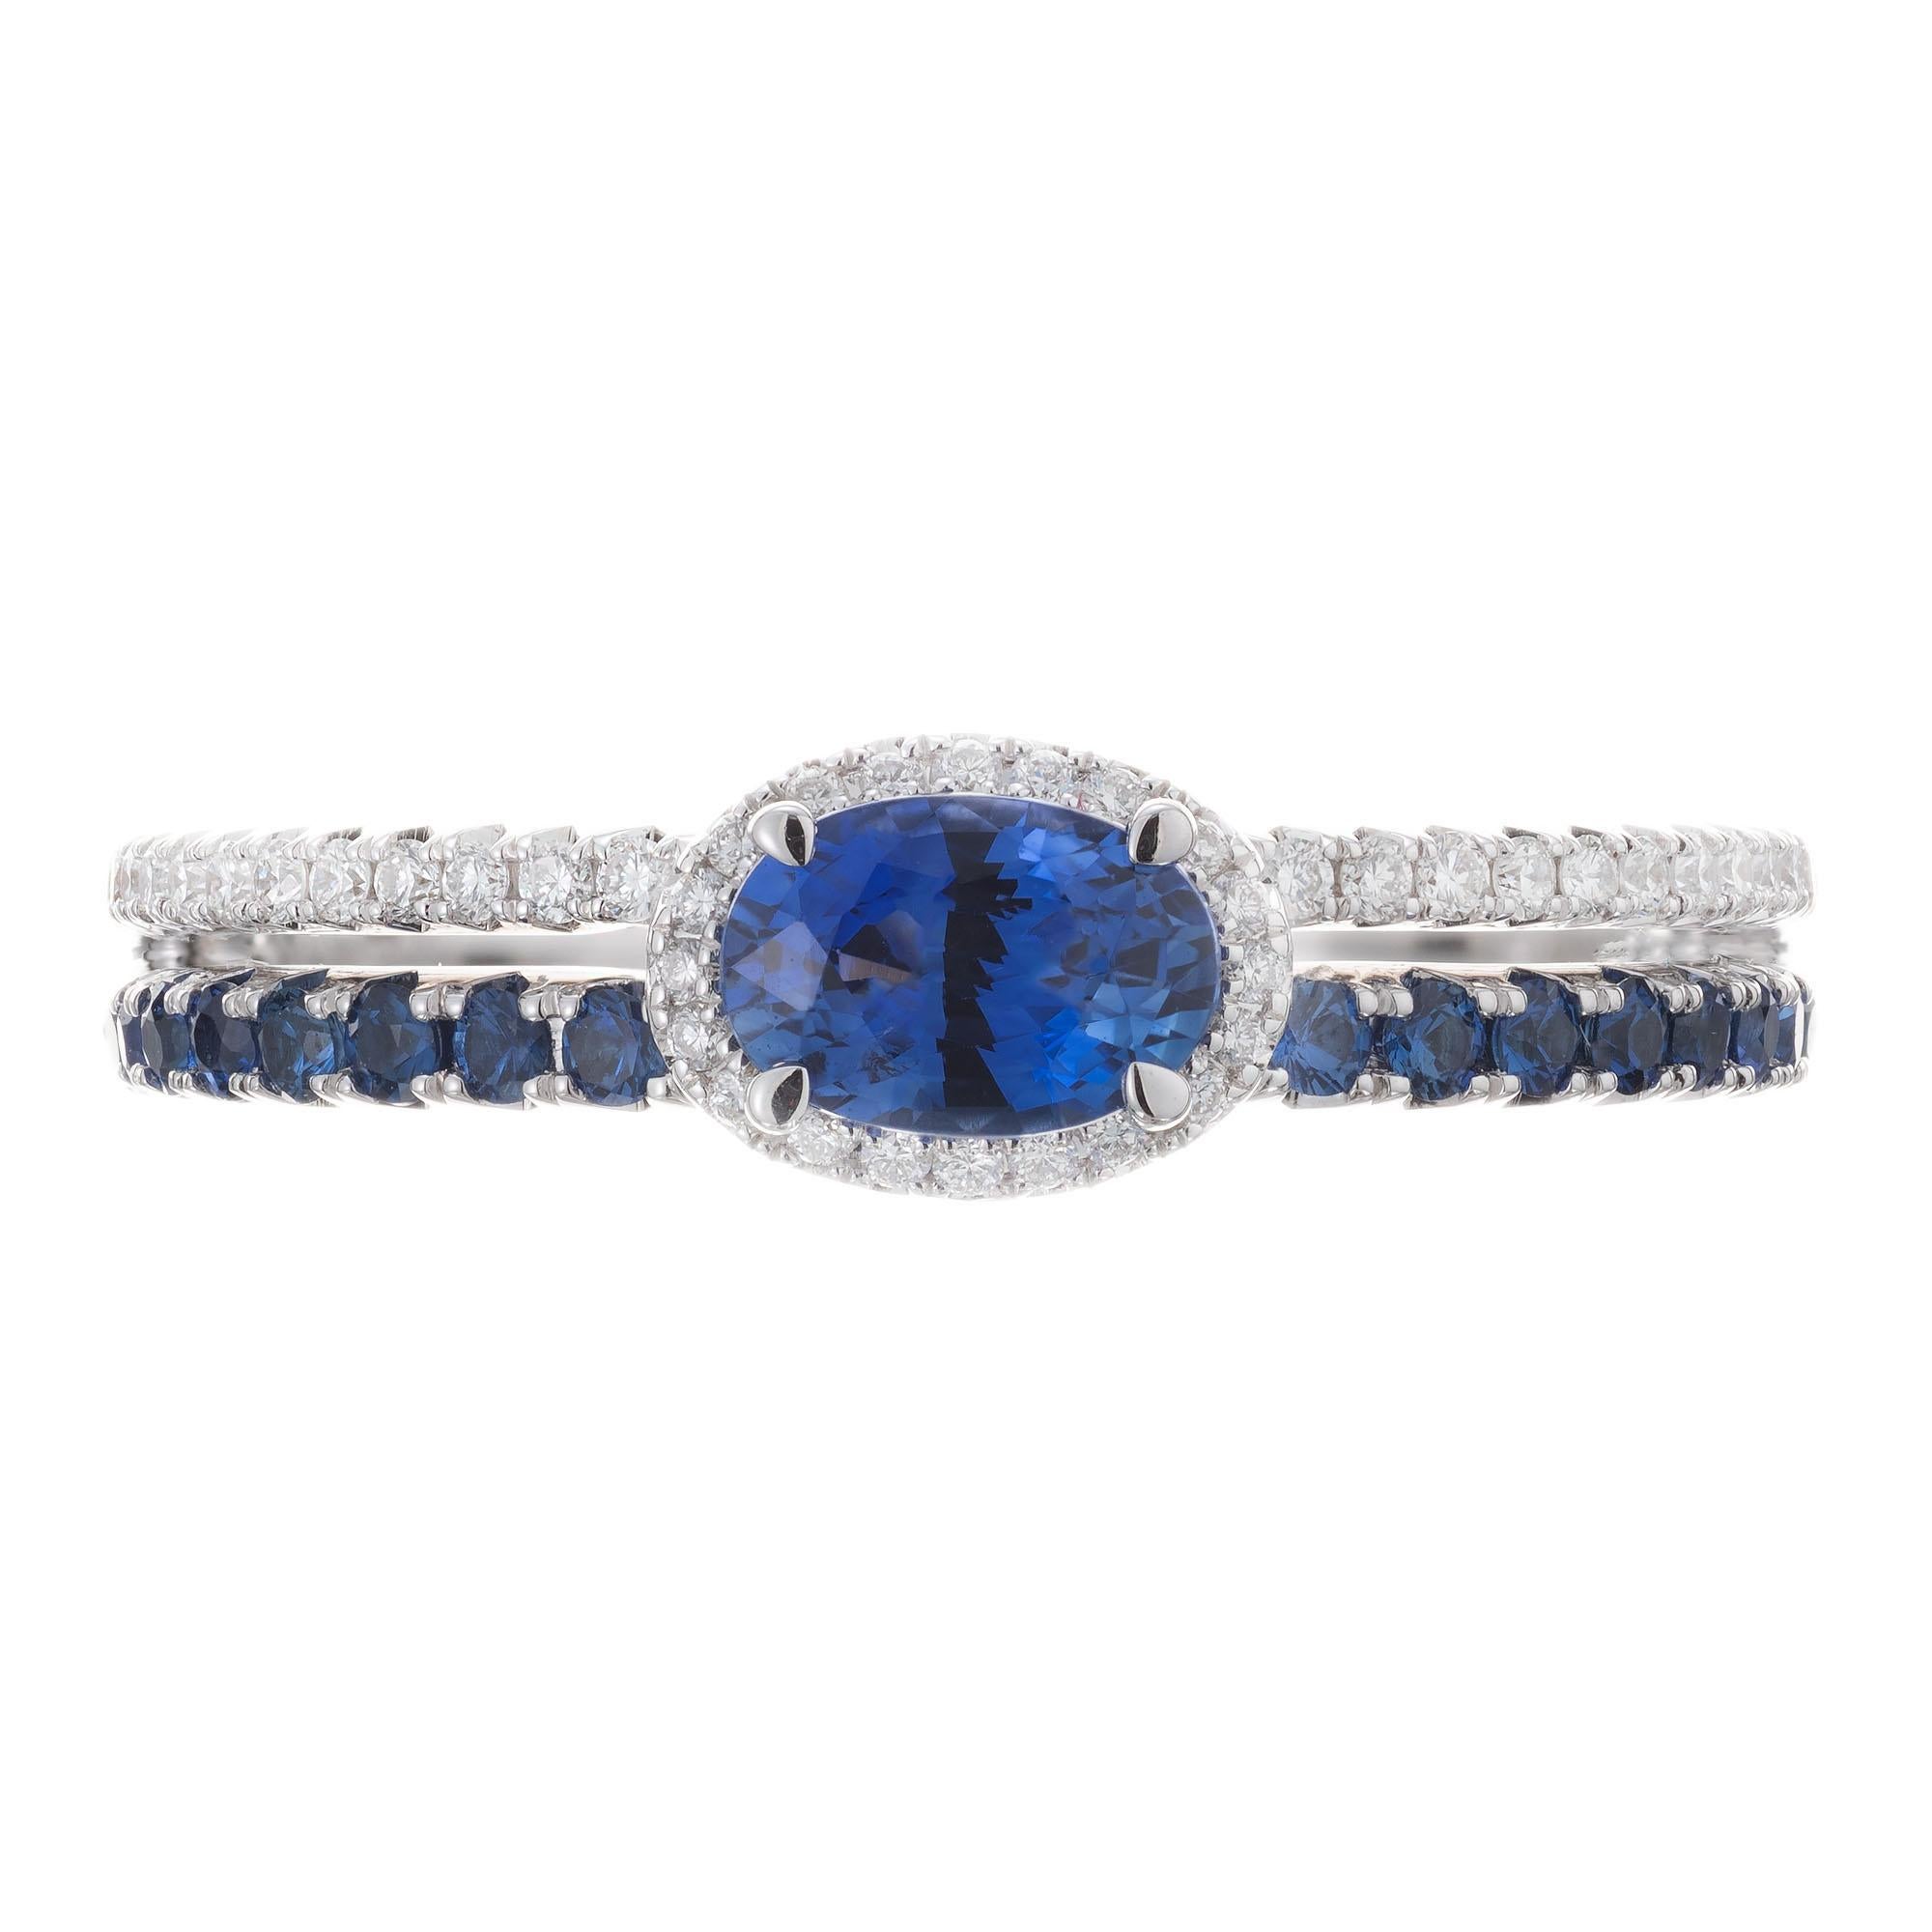 Sapphire and diamond engagement ring. Side set oval center sapphire in 14k white gold setting with round sapphires and diamonds along the split shank. 

1 oval sapphire, approx total weight. .53cts
16 round sapphires approx total weight, .32cts
14